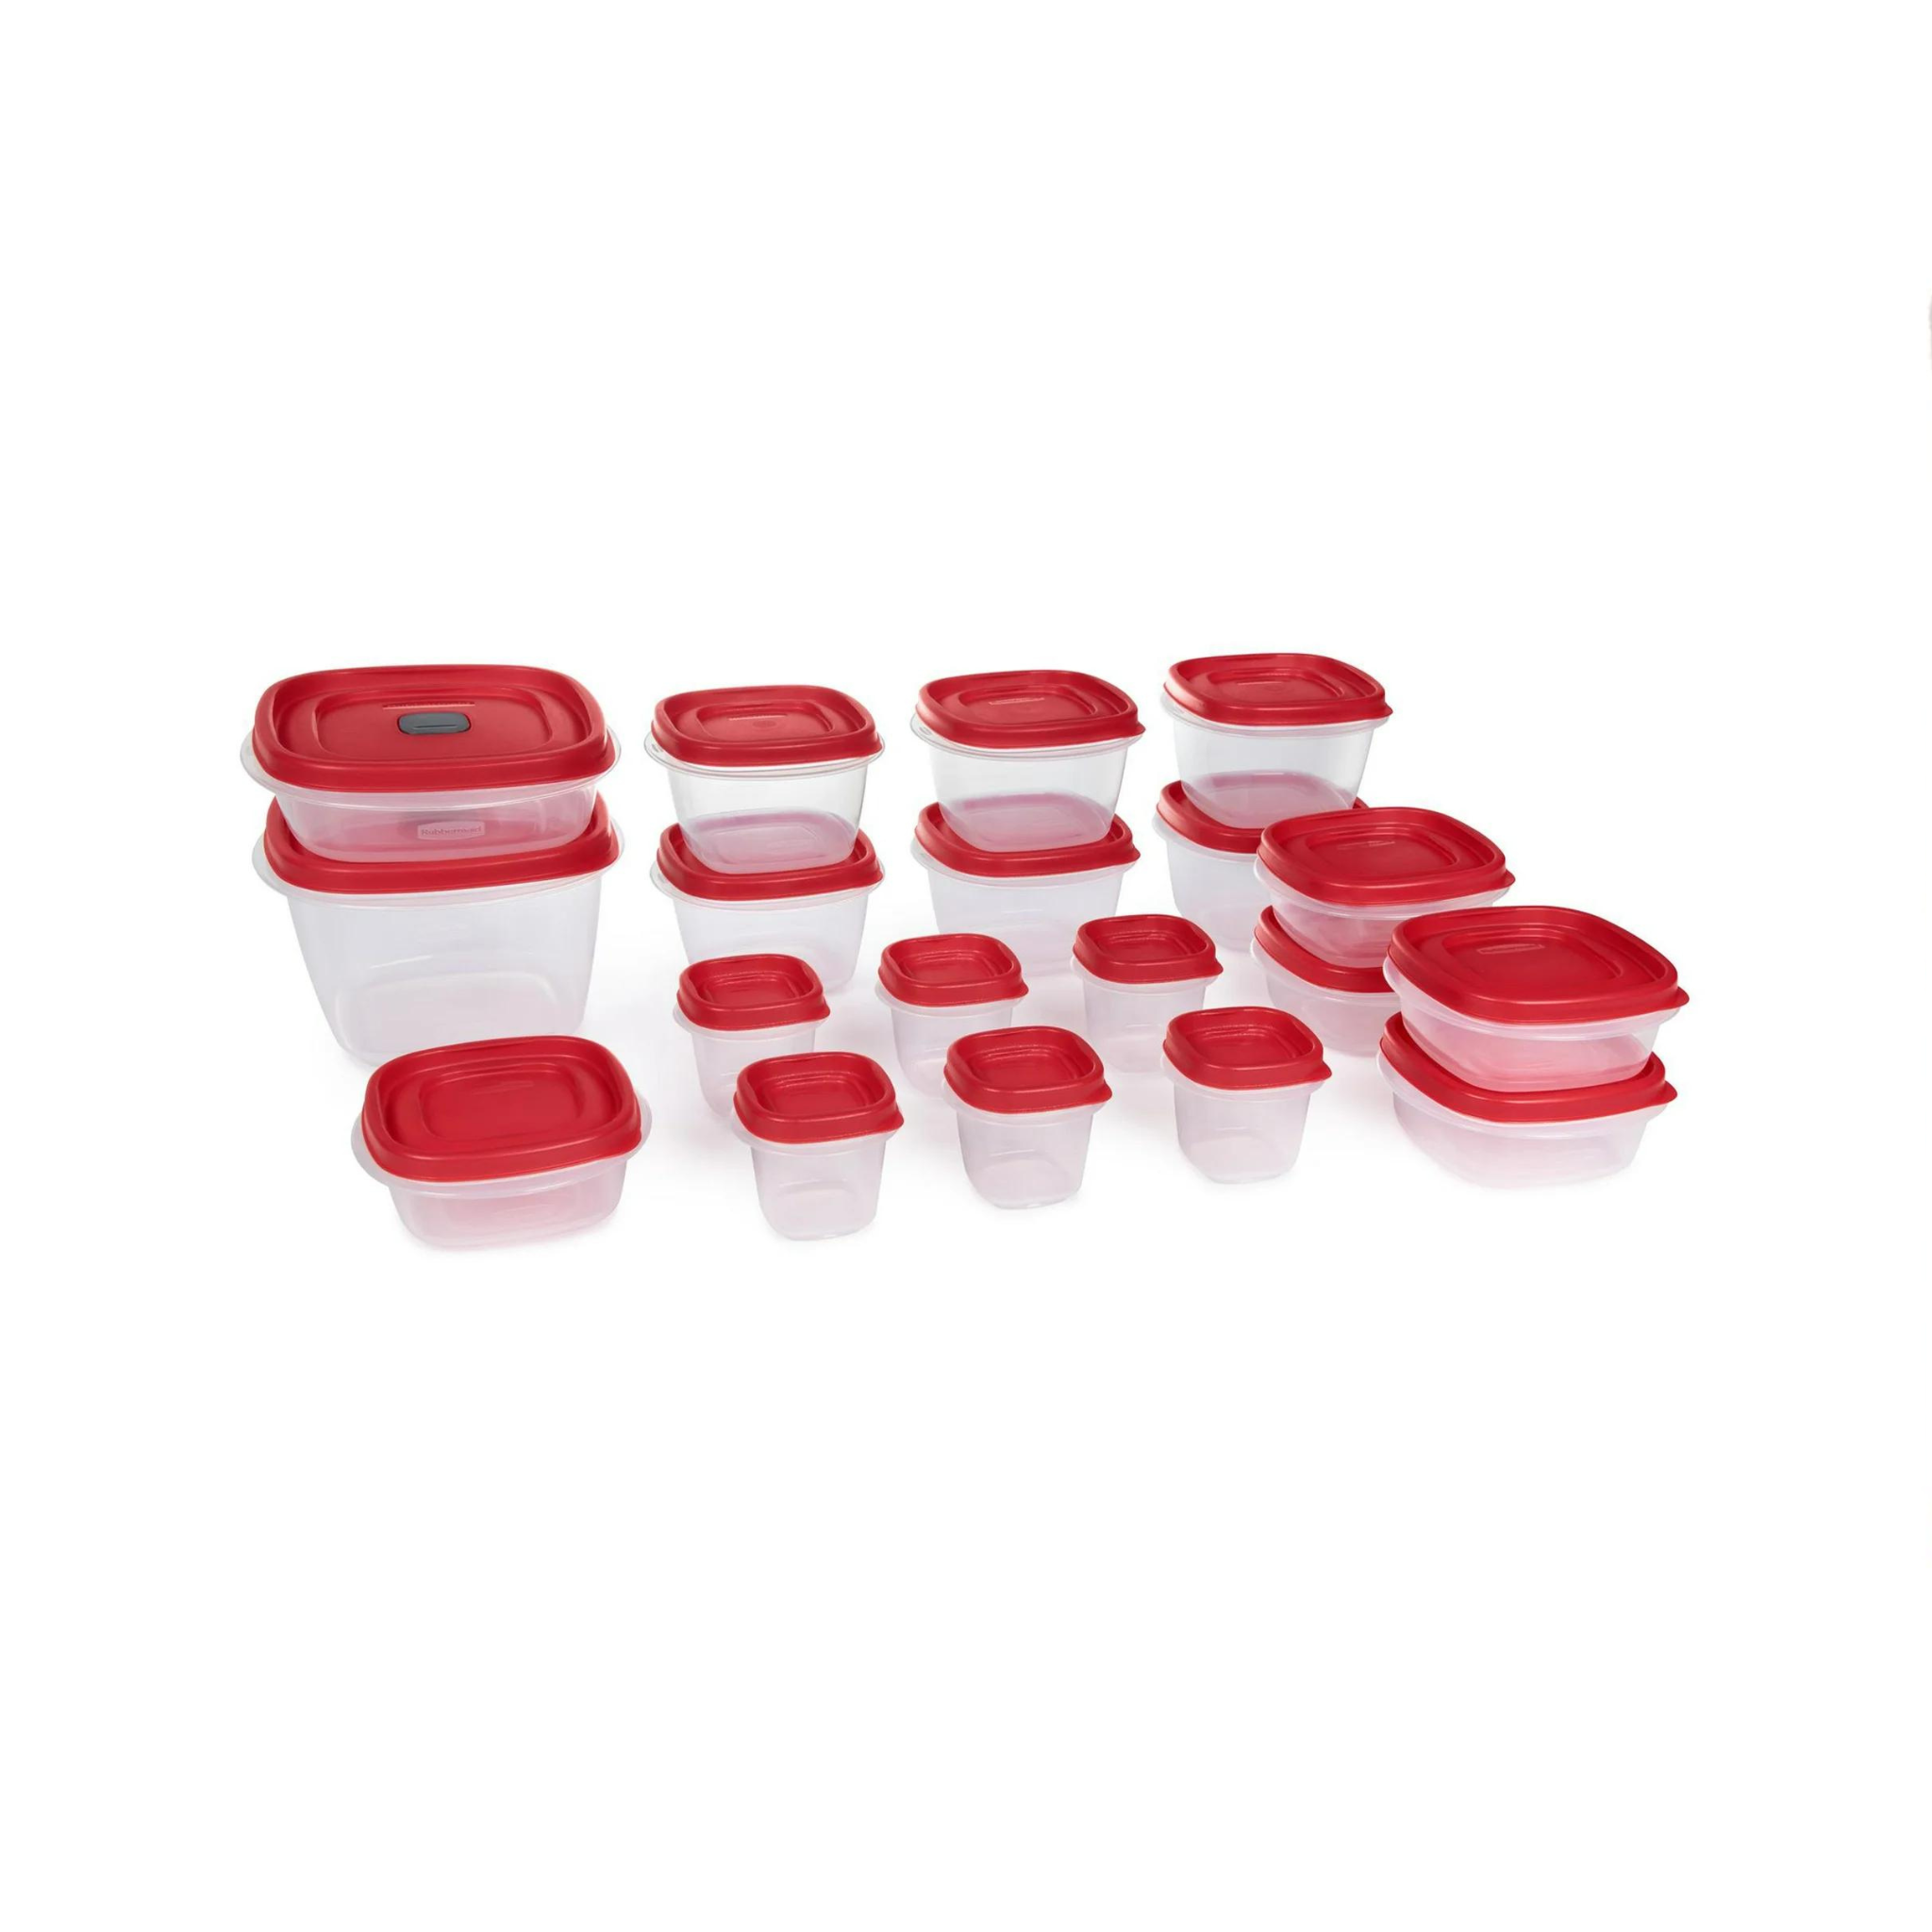 38-Piece Set Rubbermaid Easy Find Vented Lids Food Storage Containers